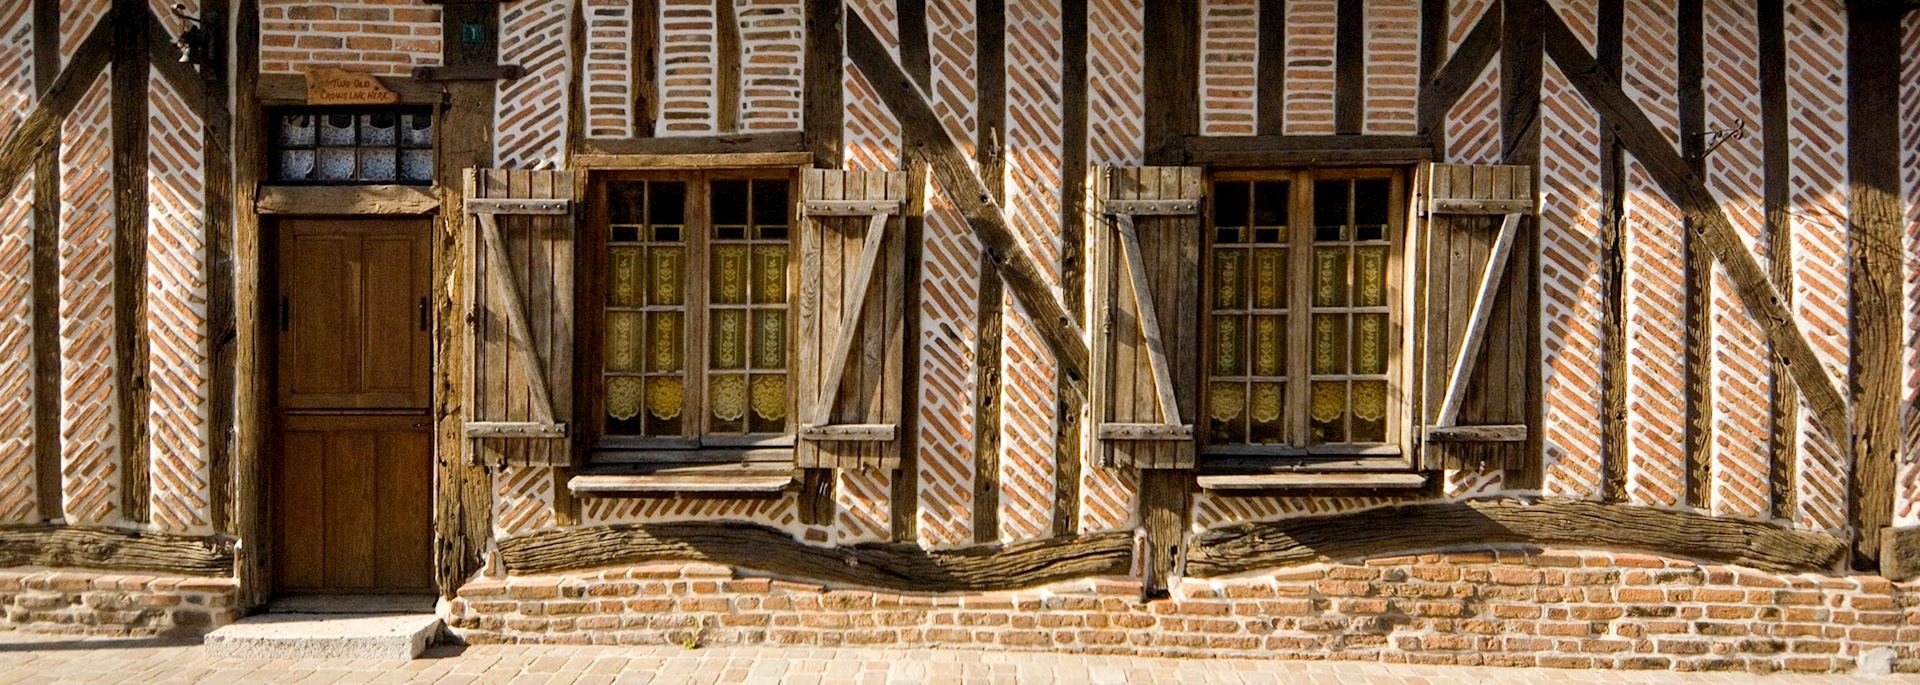 Normandy house, France